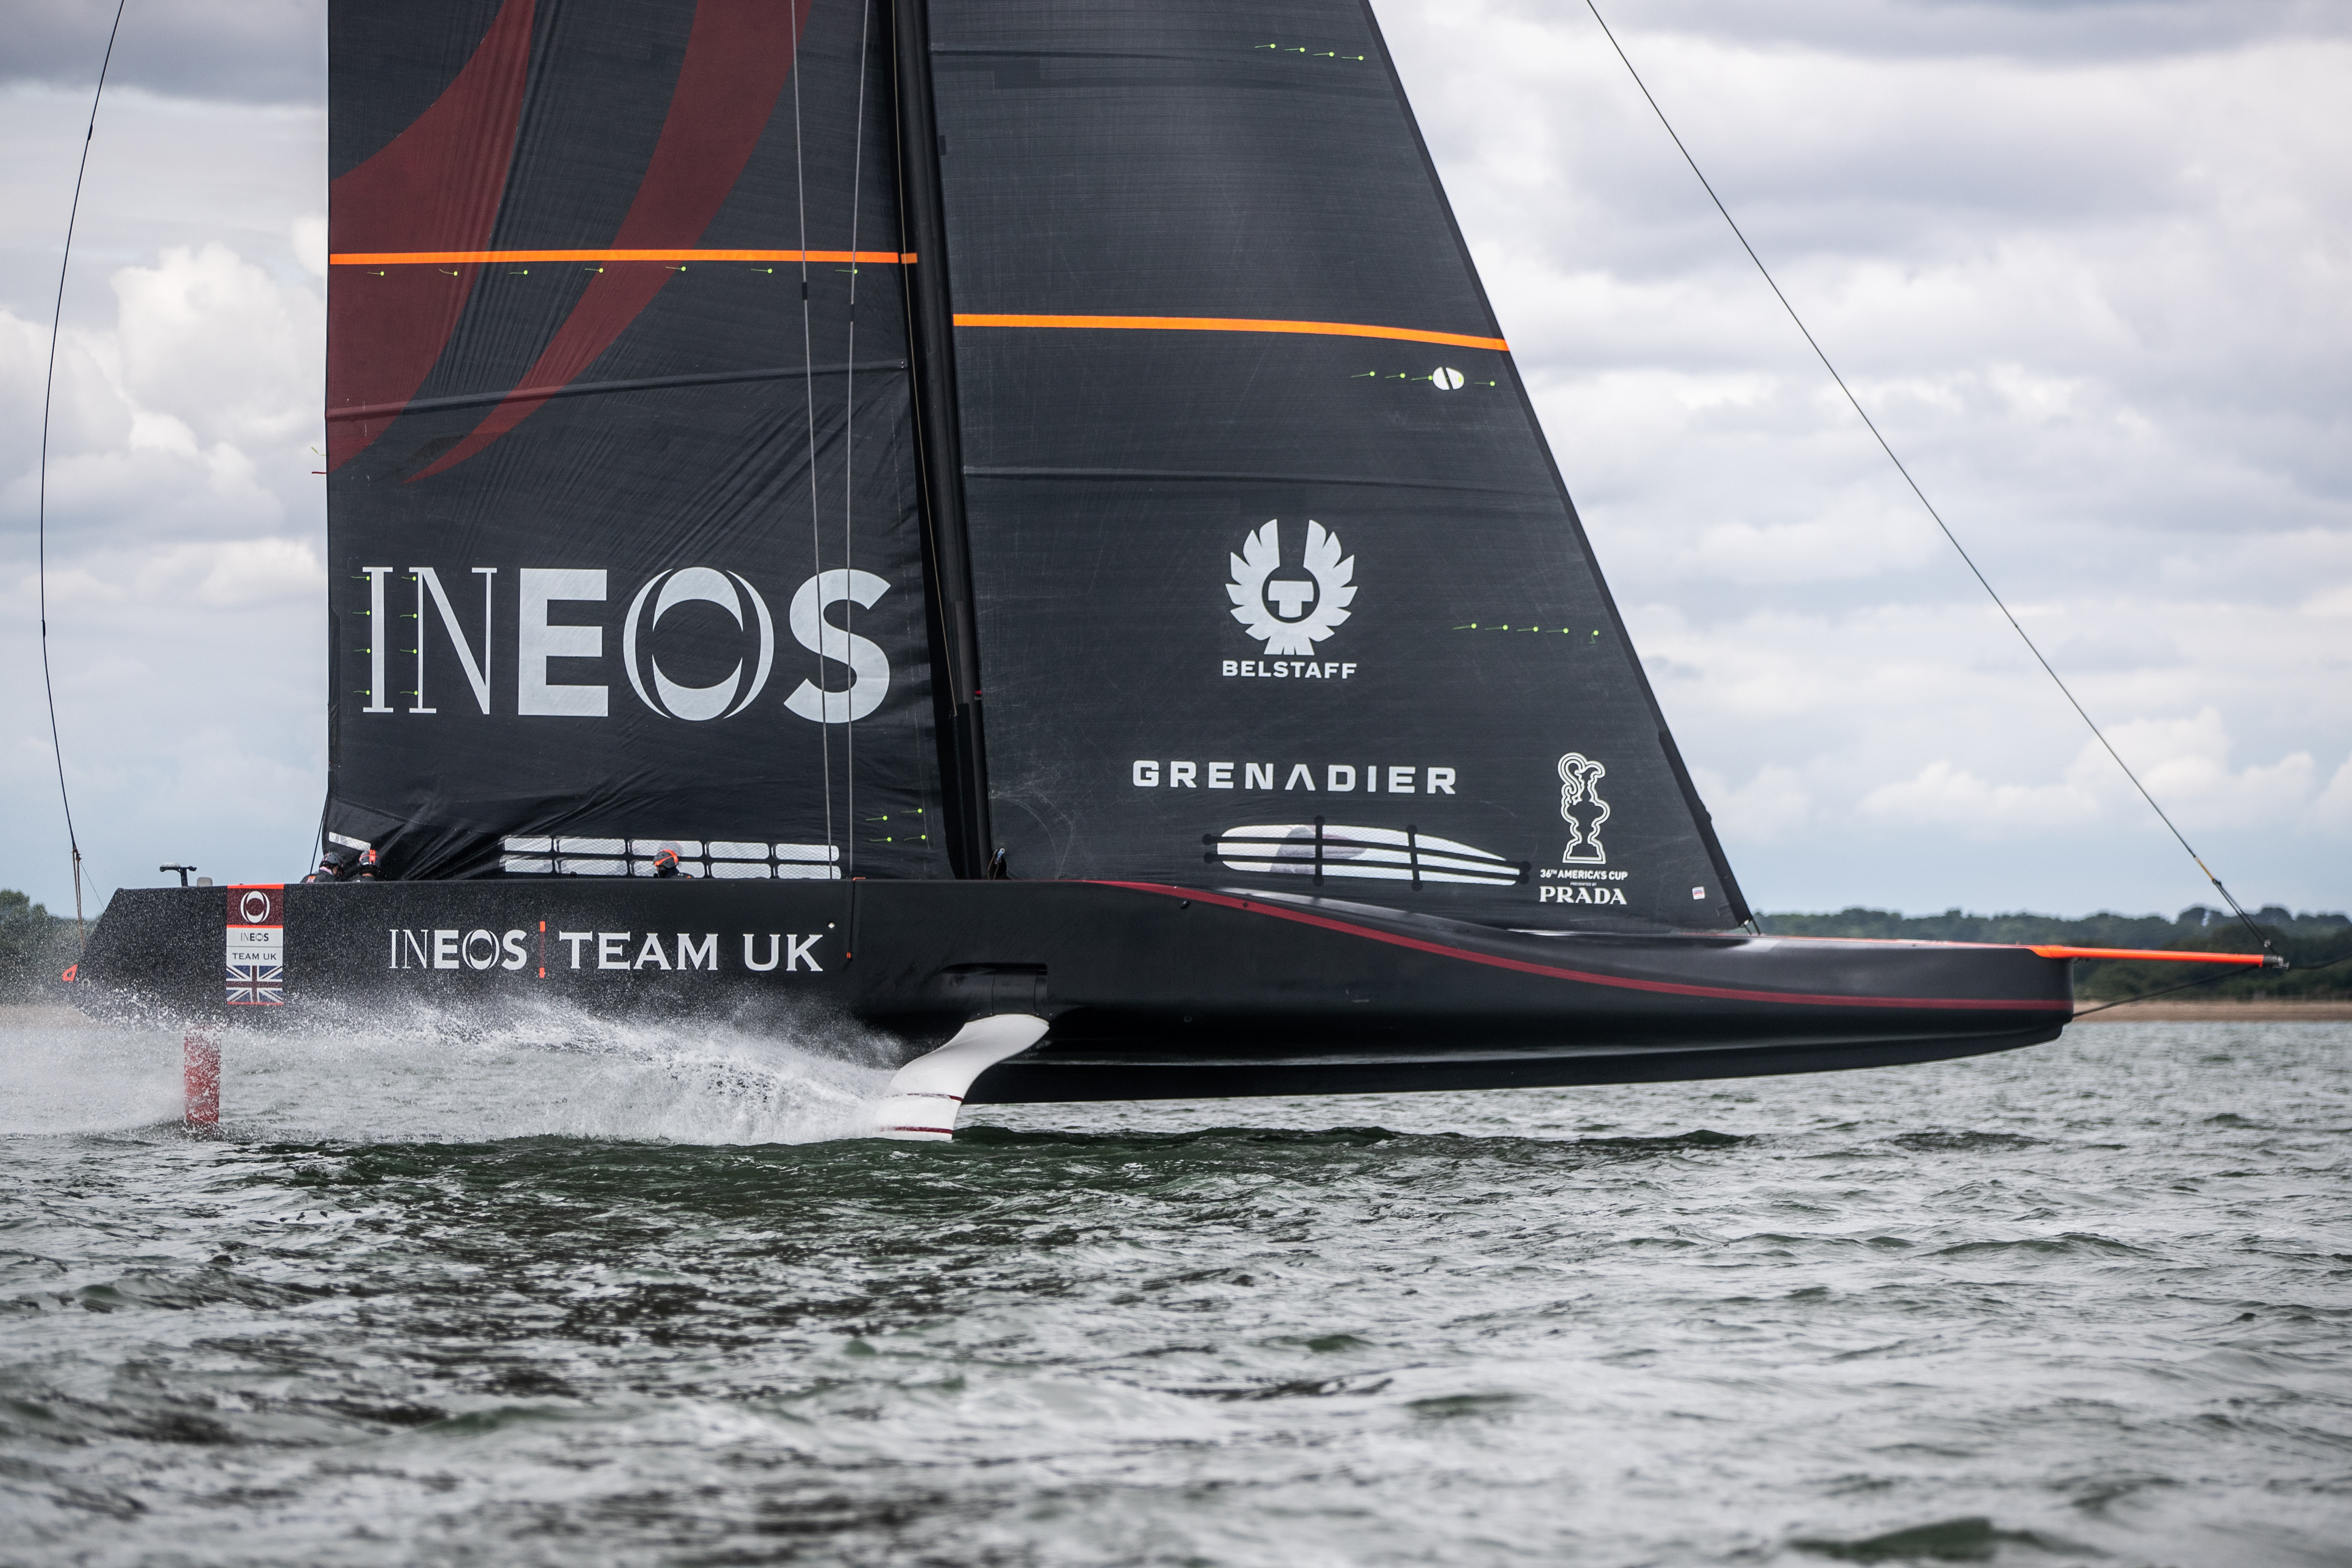 INEOS has used the software to help develop a new design concept for the AC75 boat. (Photo courtesy Cameron Gregory.)